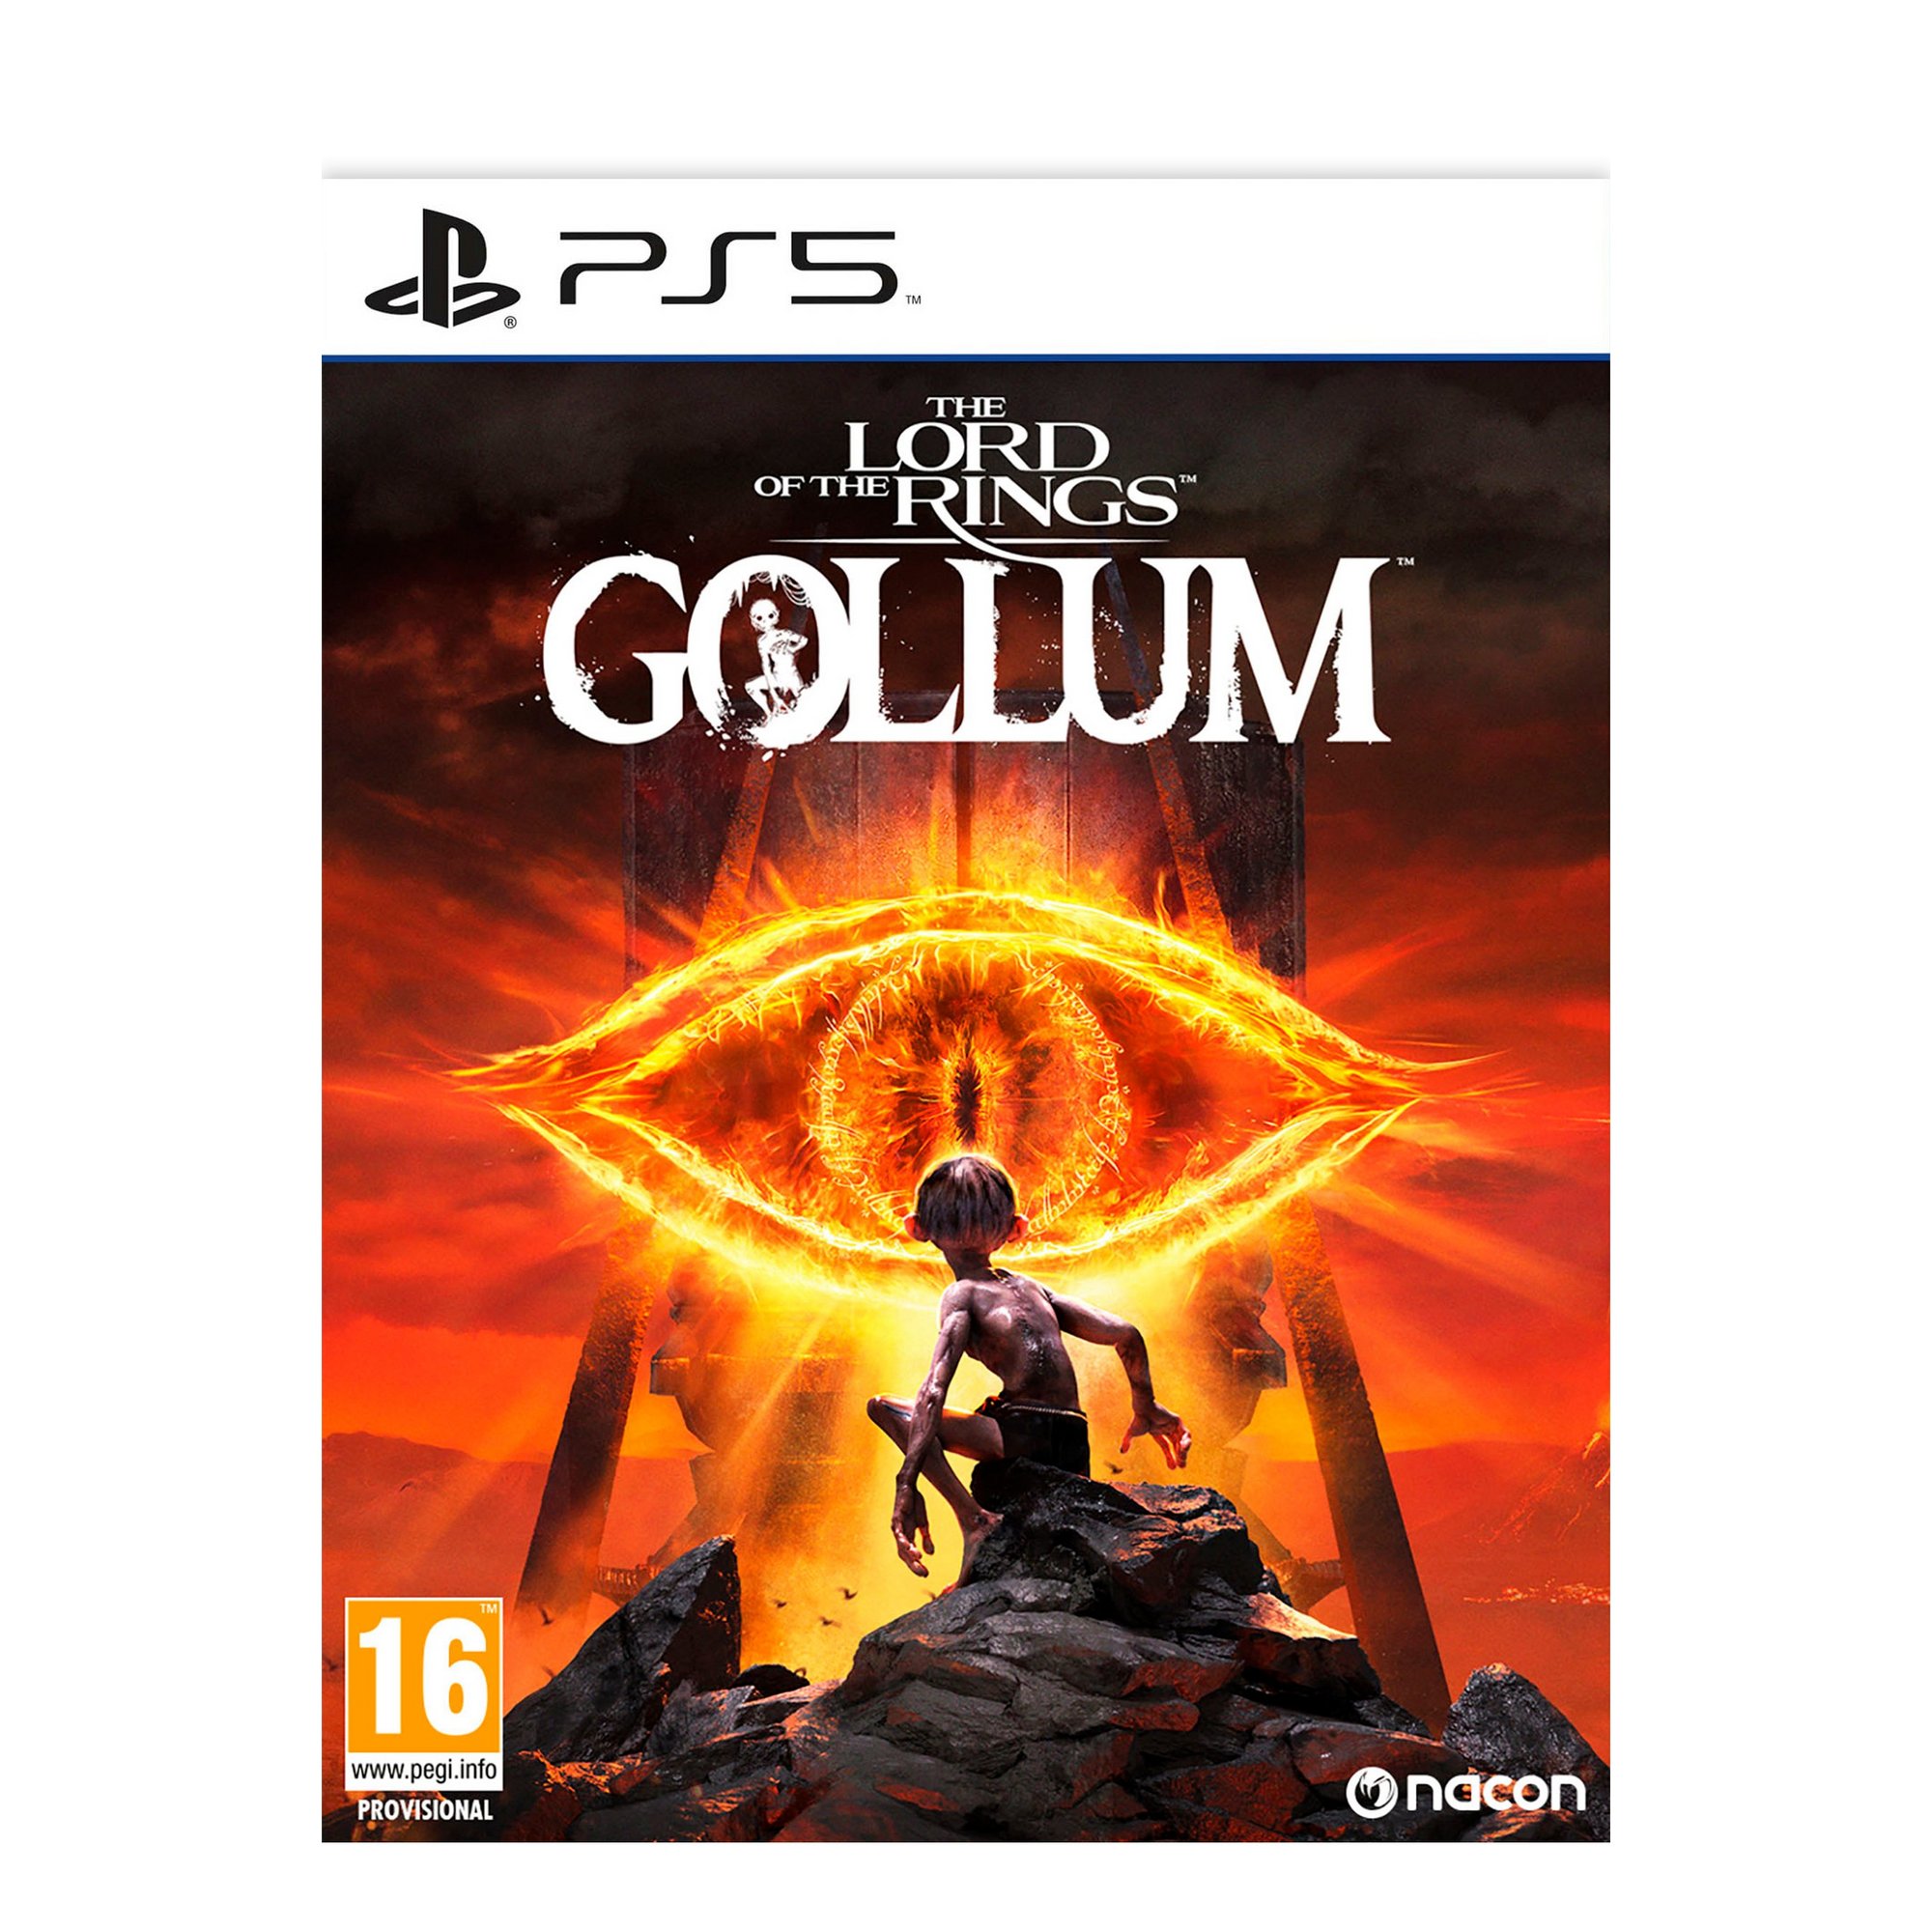 Sony PS5: PRE ORDER The Lord of the Rings: Gollum